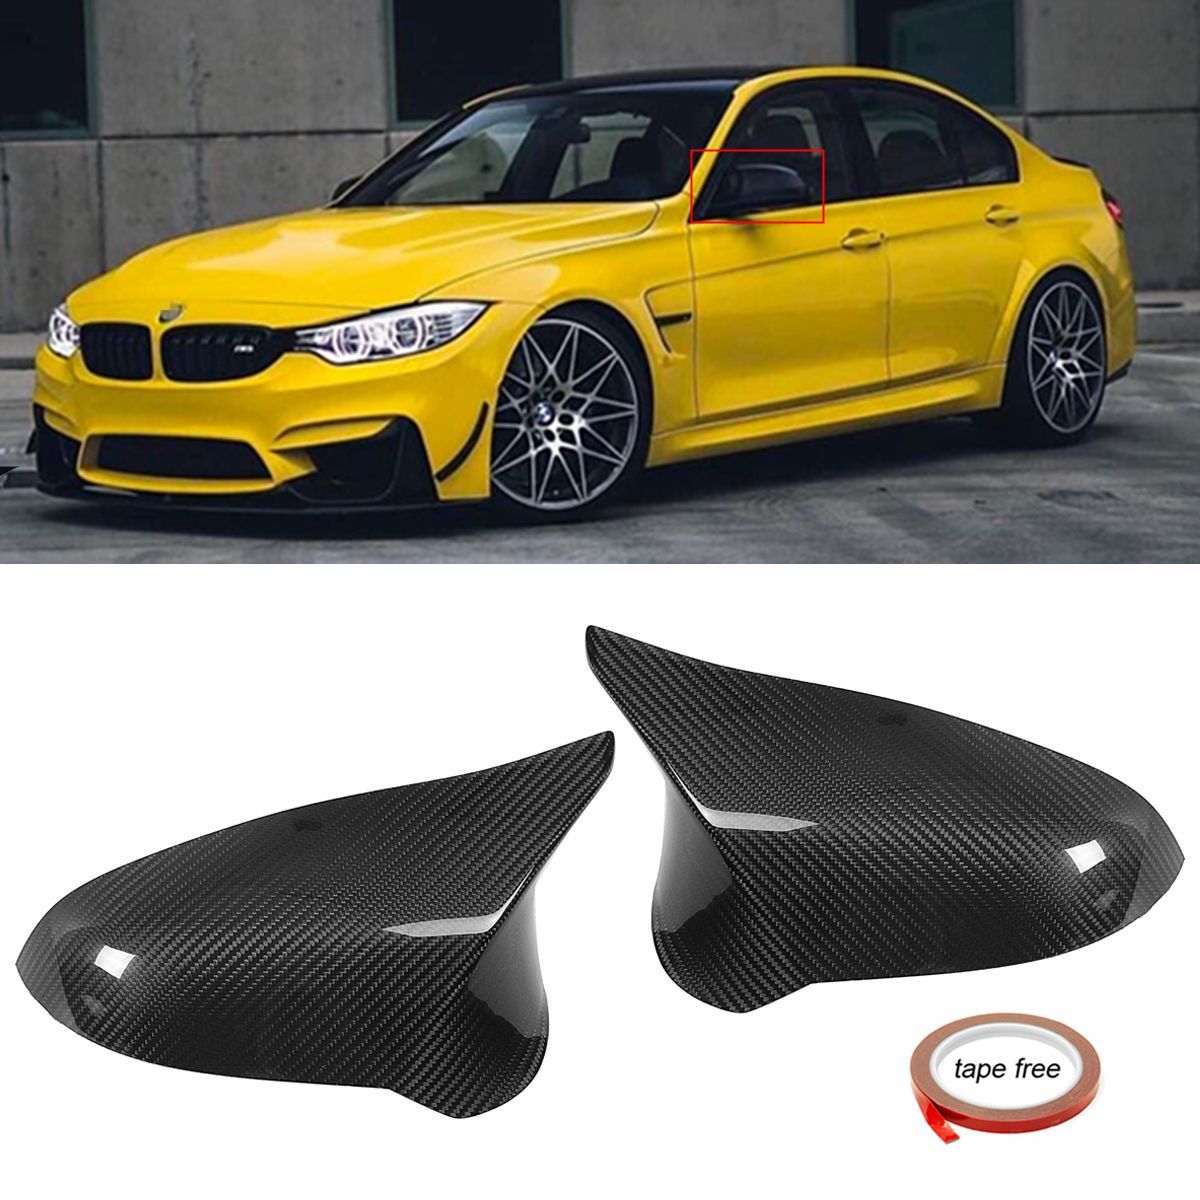 Left-Hand-Driver-Performance-Style-Carbon-Fiber-Side-Mirror-Cover-Caps-for-BMW-2015-2018-F82-M4-1351740